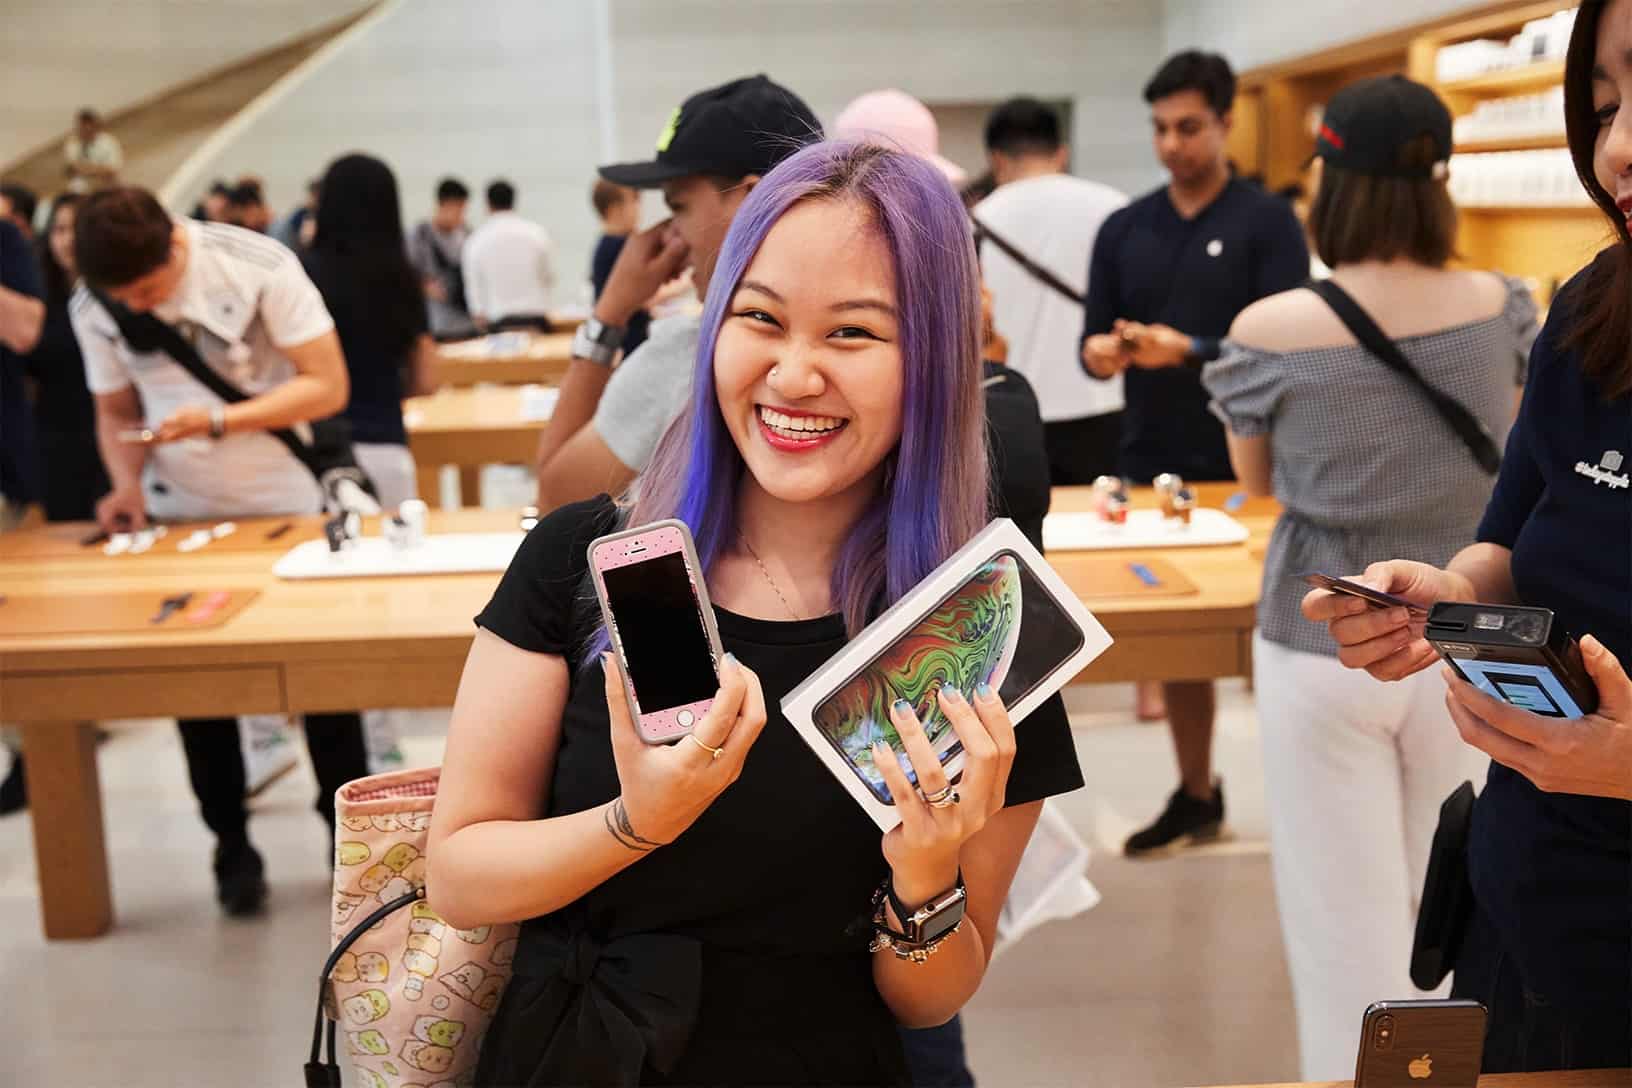 Smiling Apple fans show off their new haul of devices | Cult of Mac